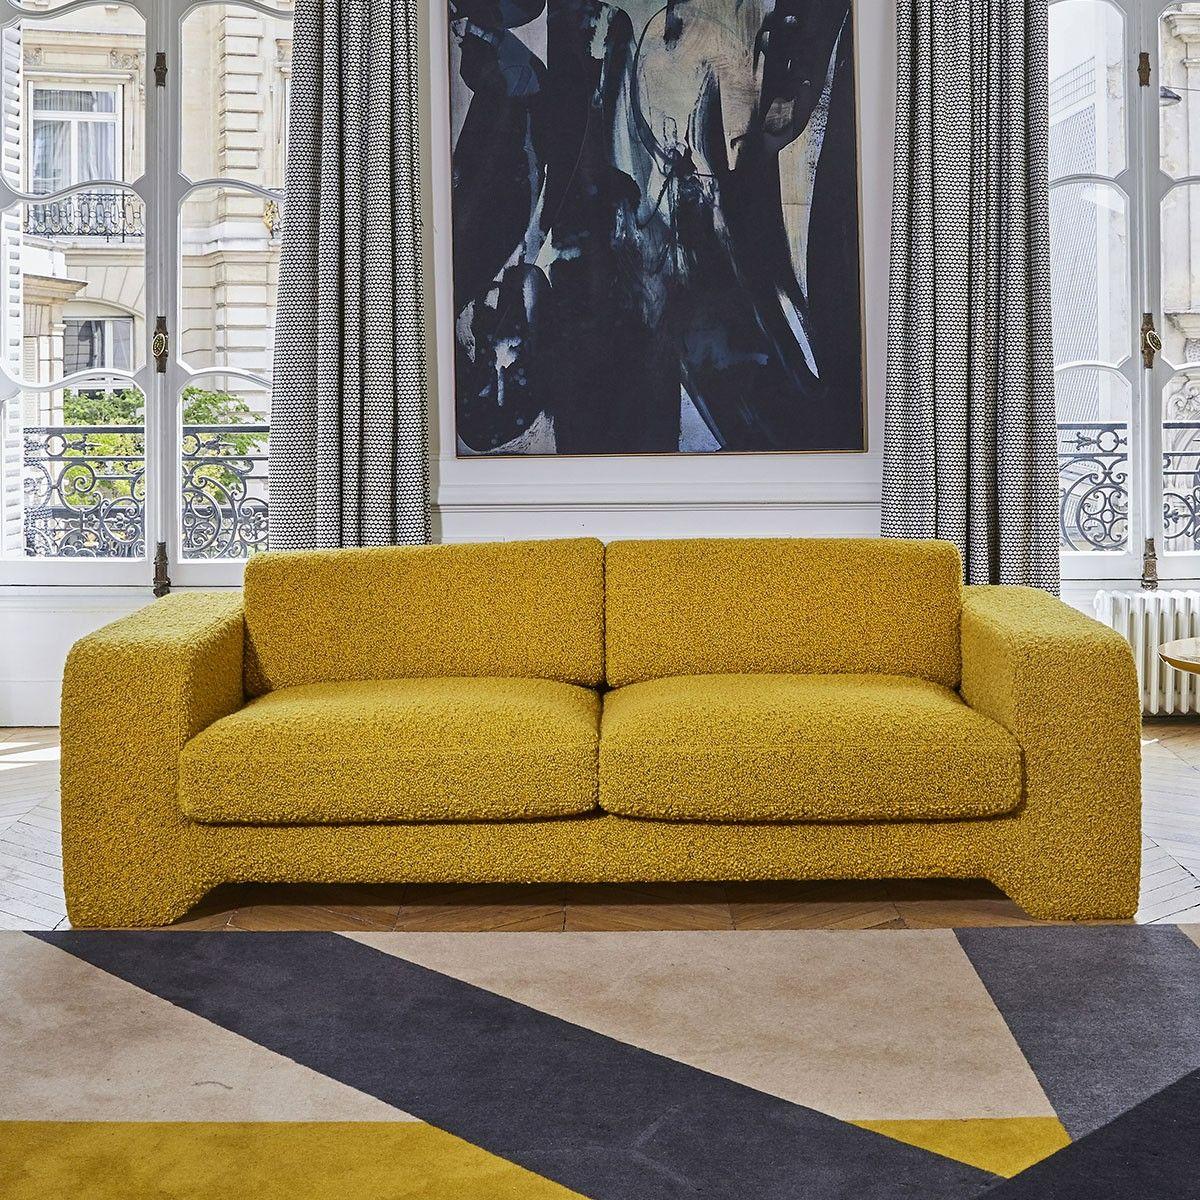 Popus Editions Giovanna 3 seater sofa in Mole Malmoe Terry Upholstery

Giovanna is a sofa with a strong profile. A sober, plush line, with this famous detail that changes everything, so as not to forget its strength of character and this charming